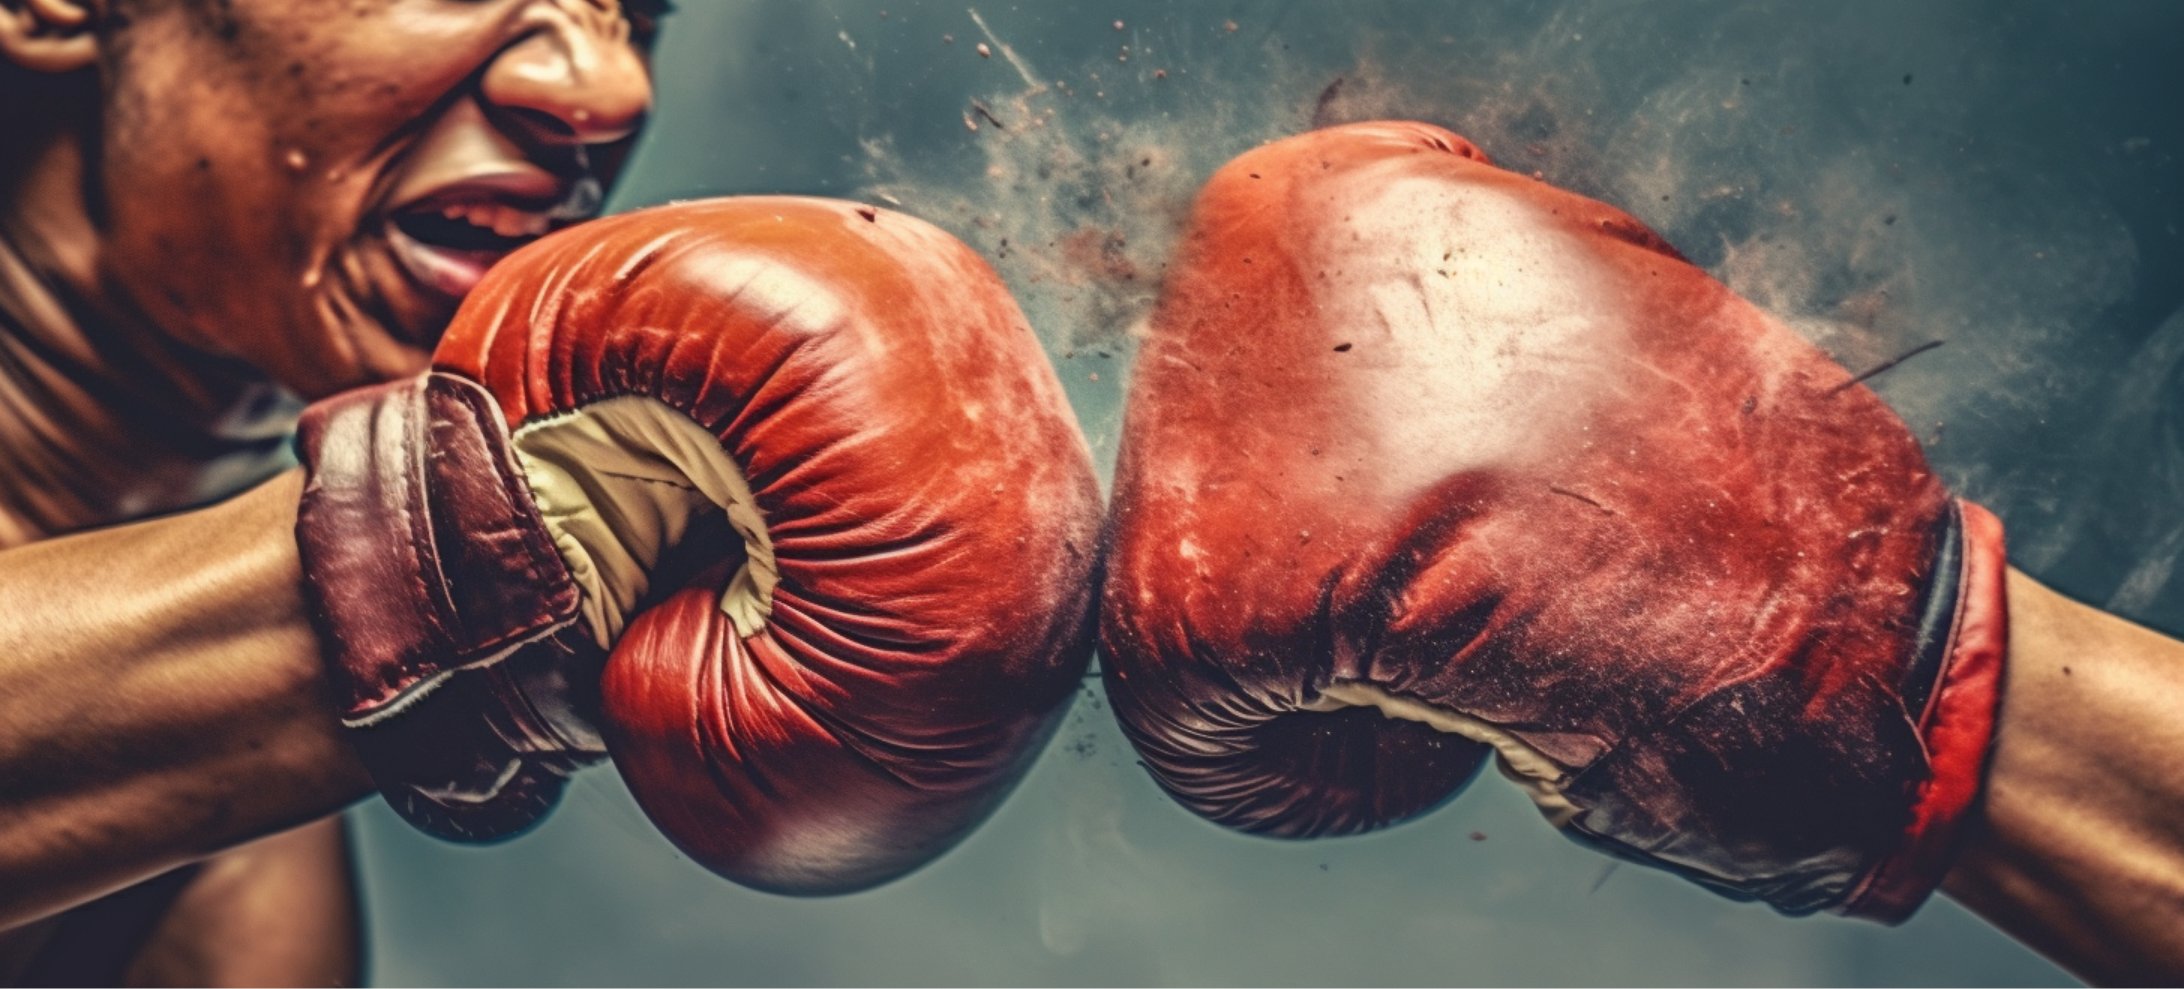 AI image of Boxing Gloves by CreativeFolks